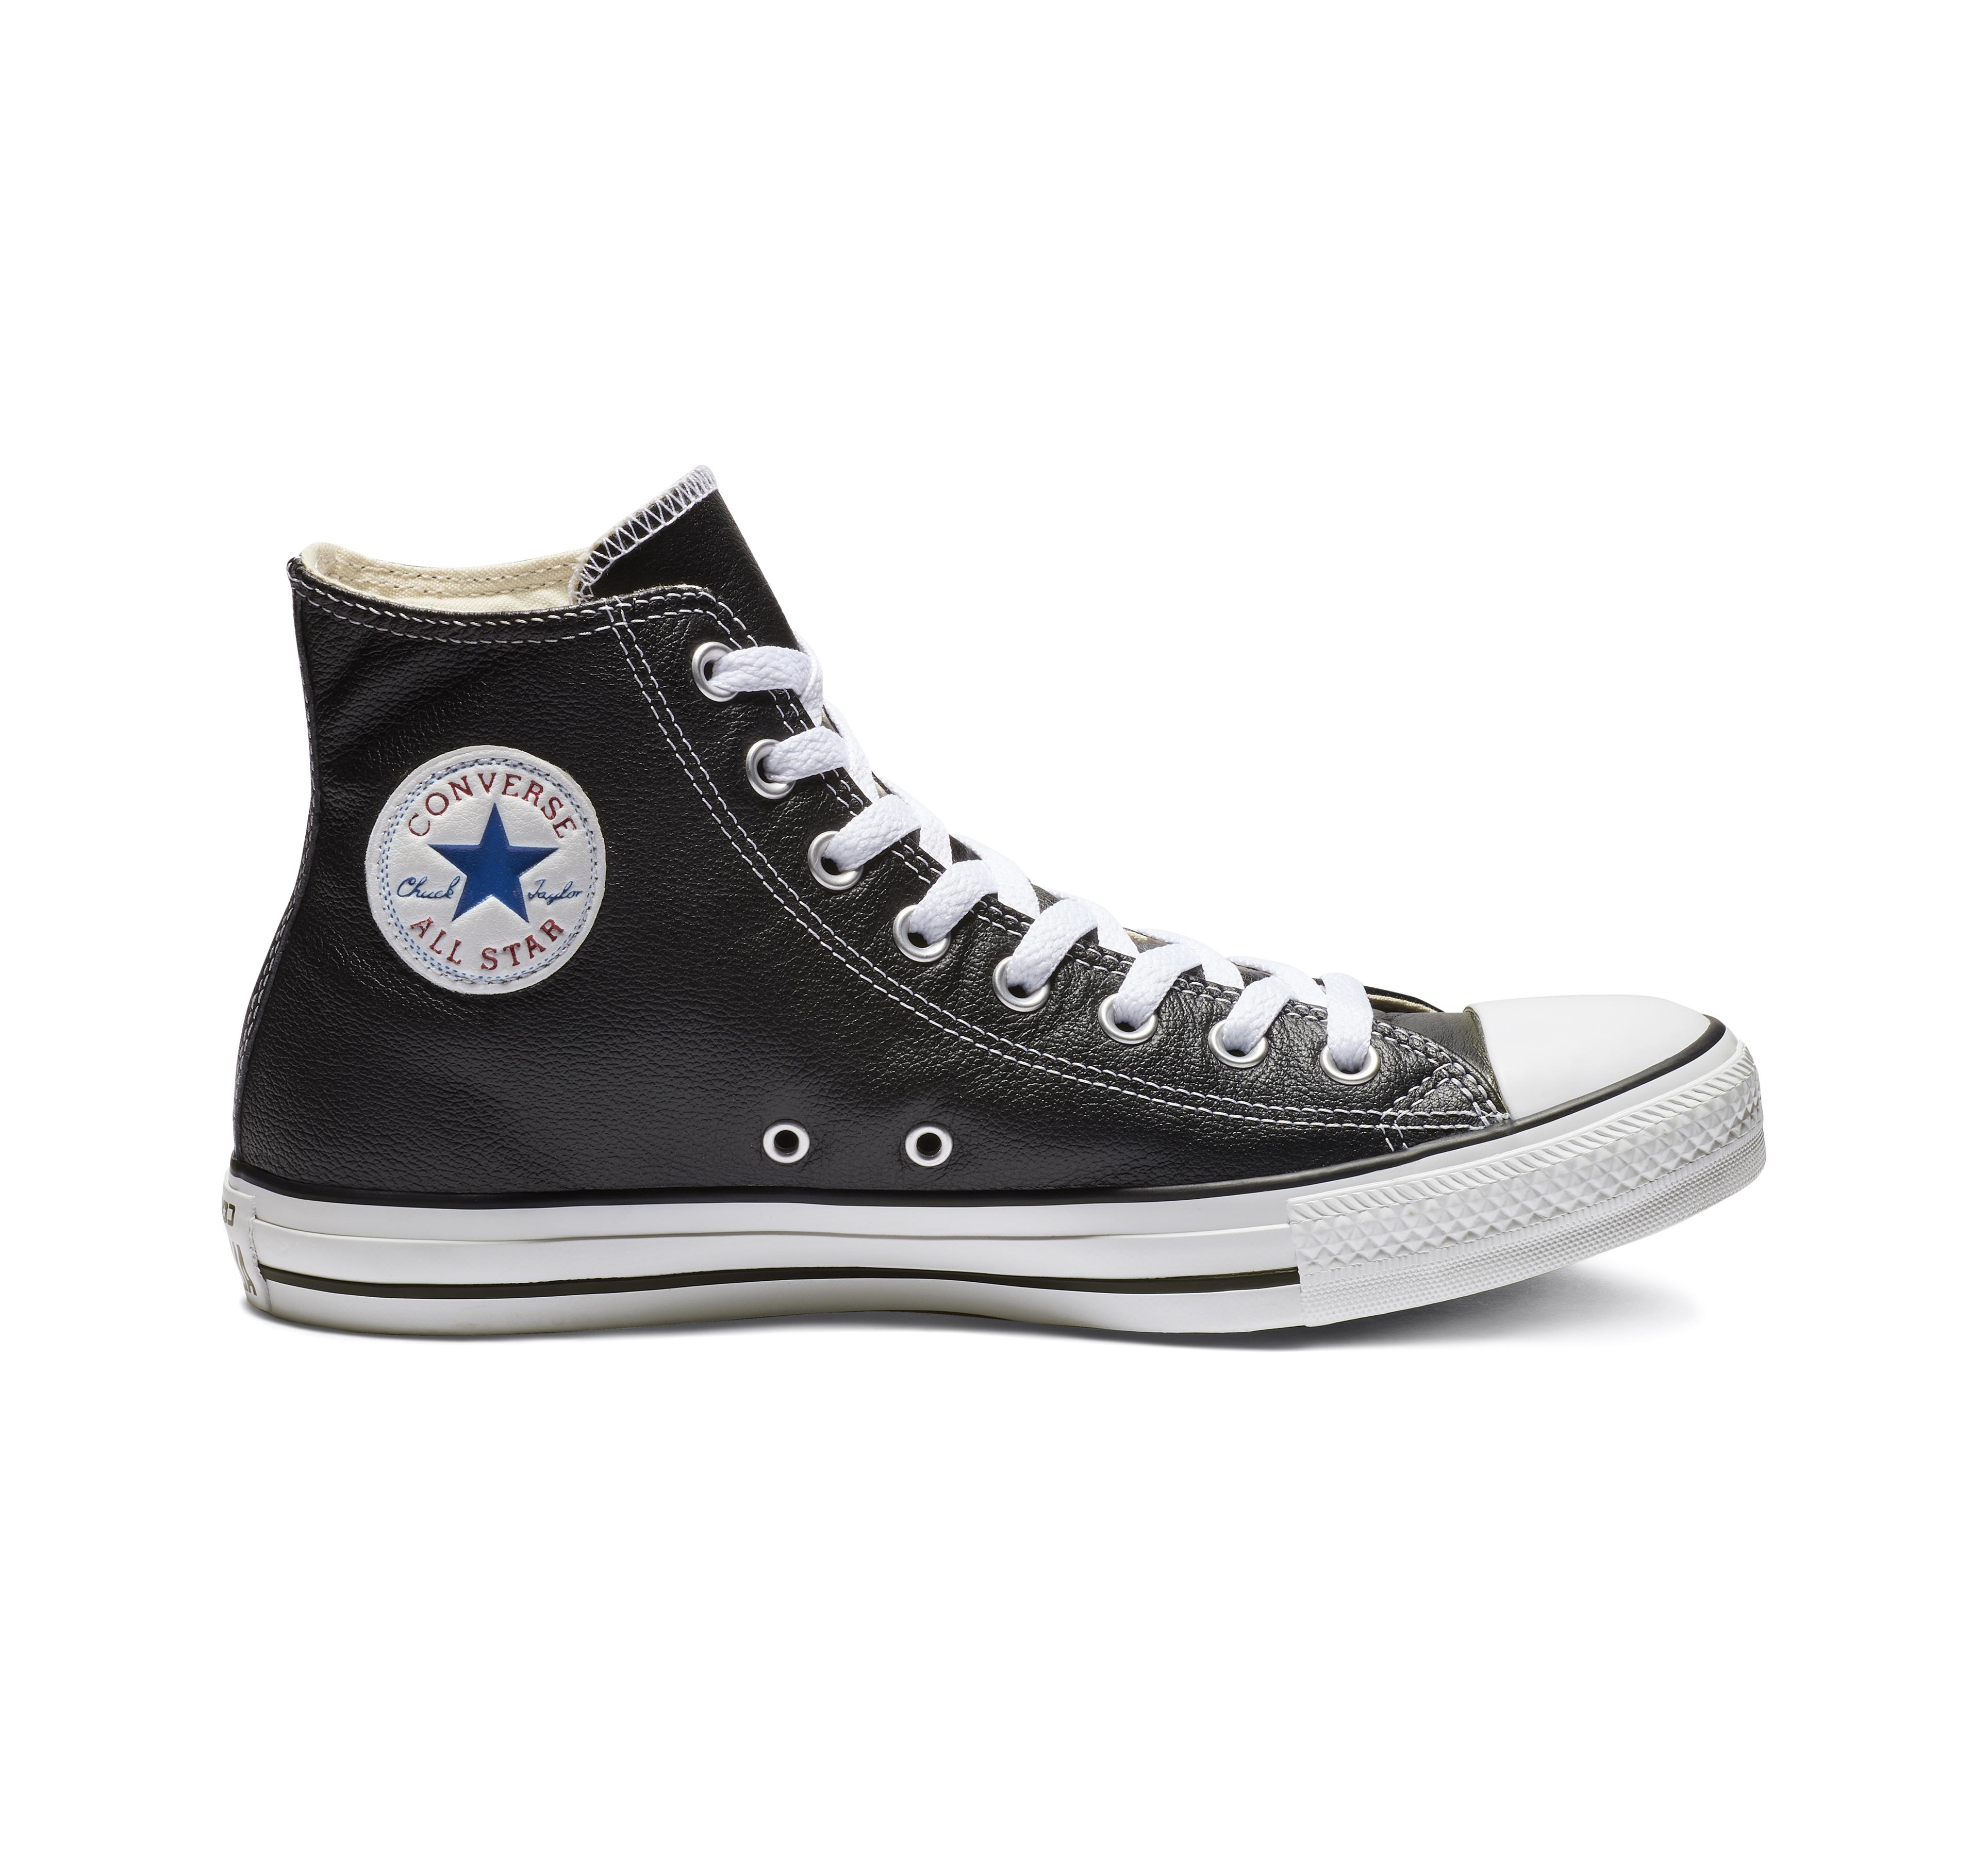 Converse Chuck Taylor All Star Leather in Black for Men - Lyst